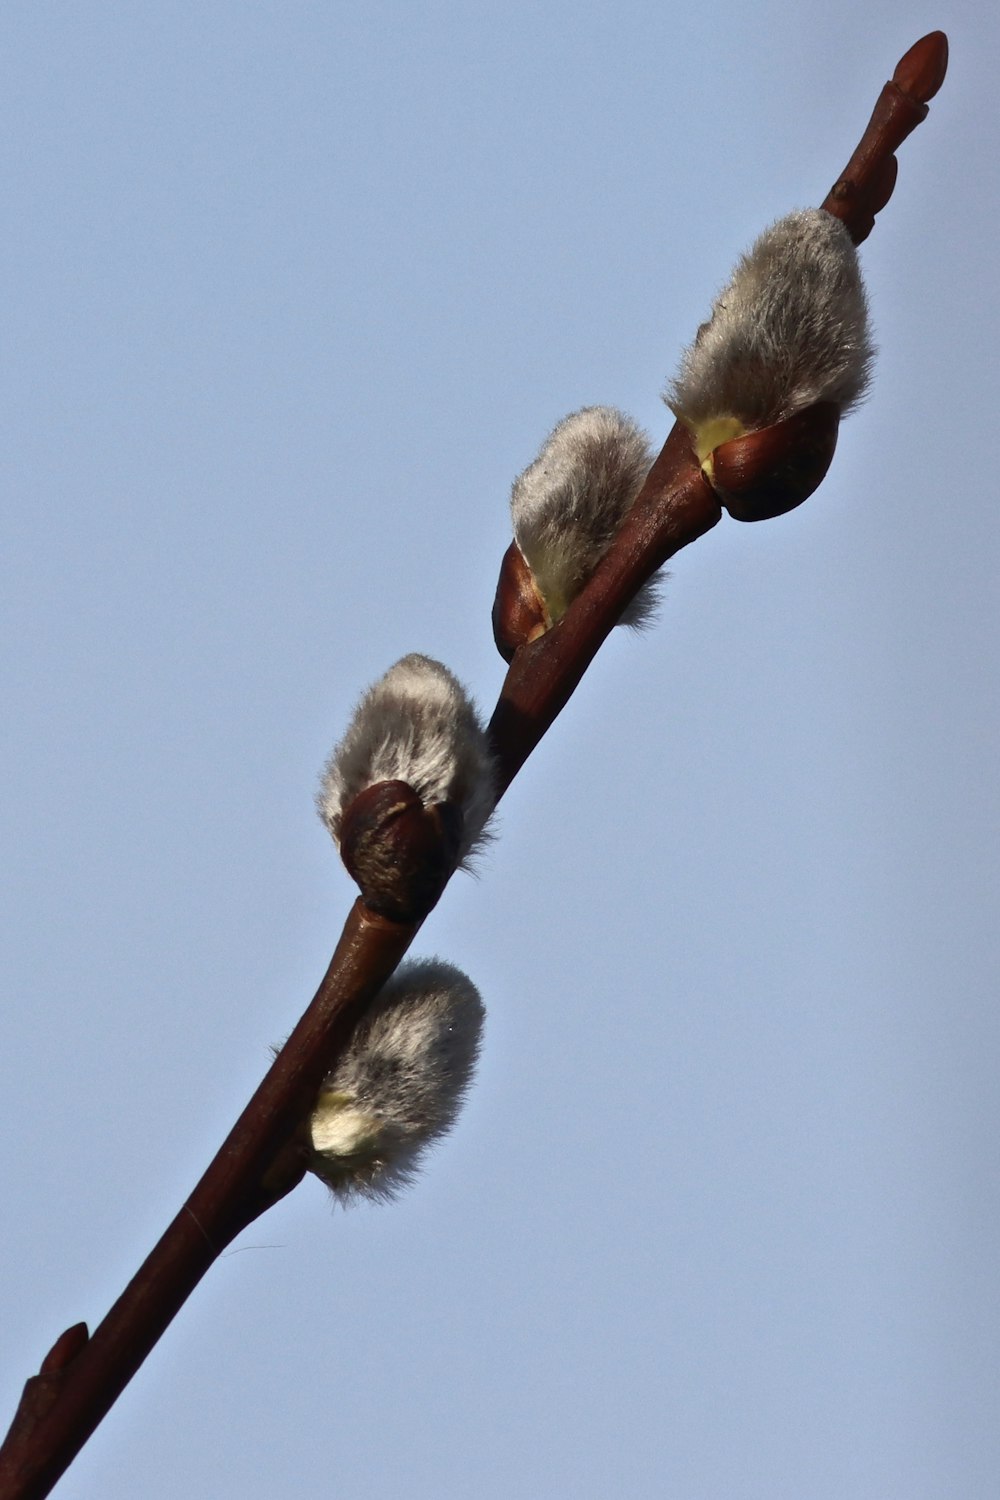 a close up of a tree branch with buds